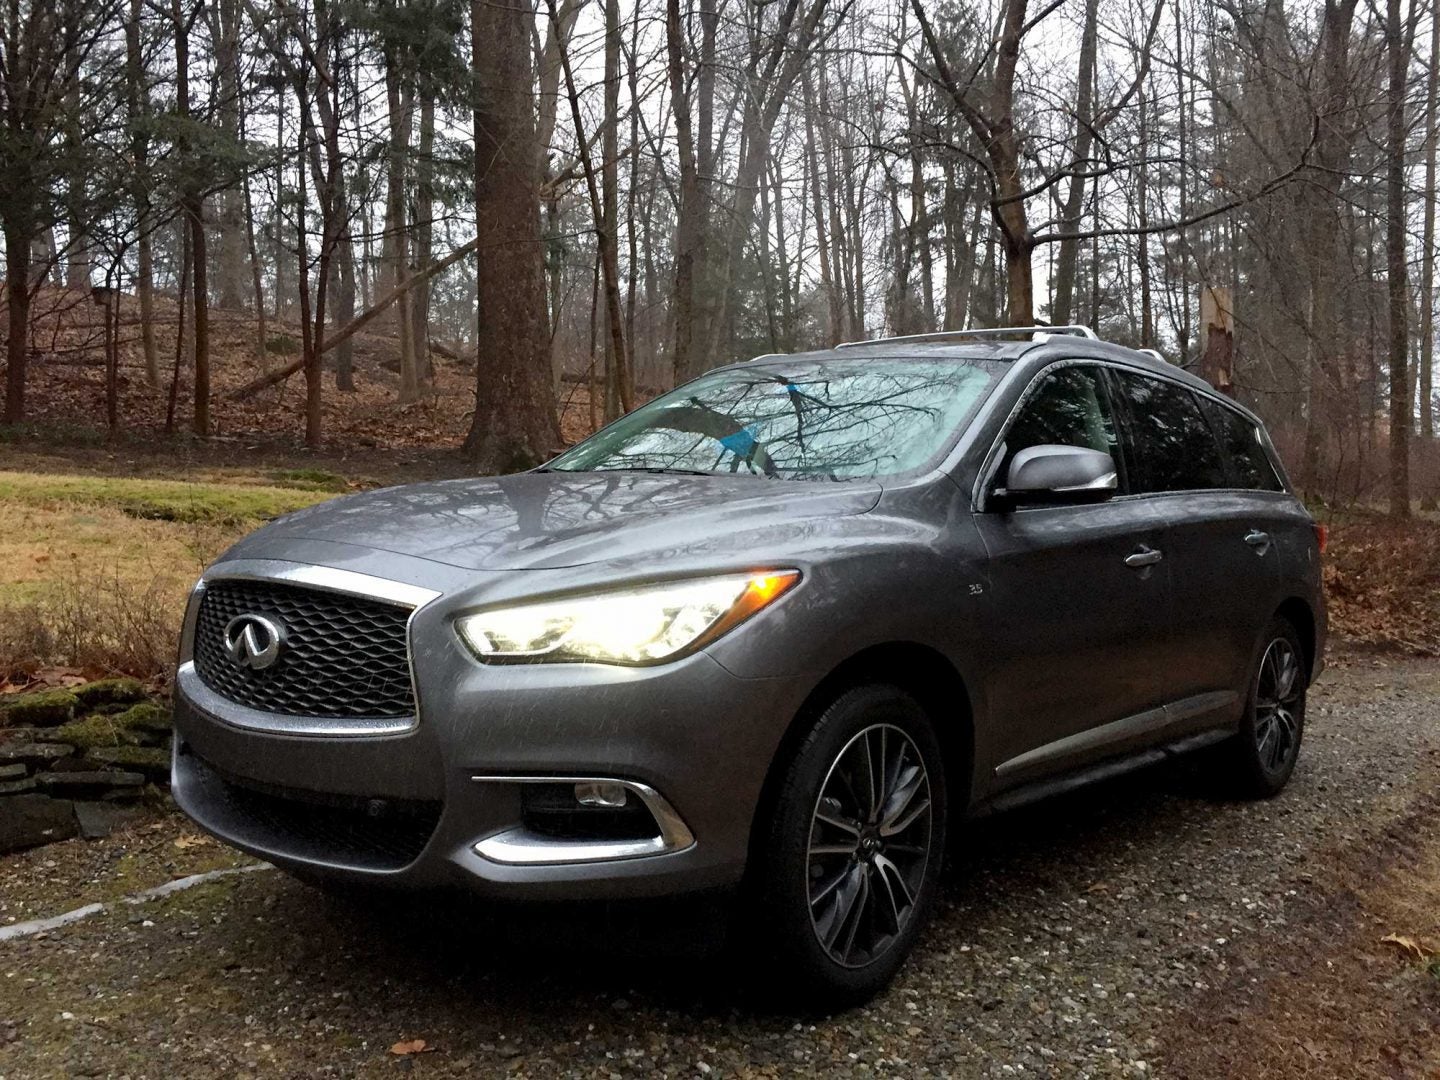 The 2017 Infiniti QX60 Is the All-Around Family SUV You&#8217;ve Been Looking For